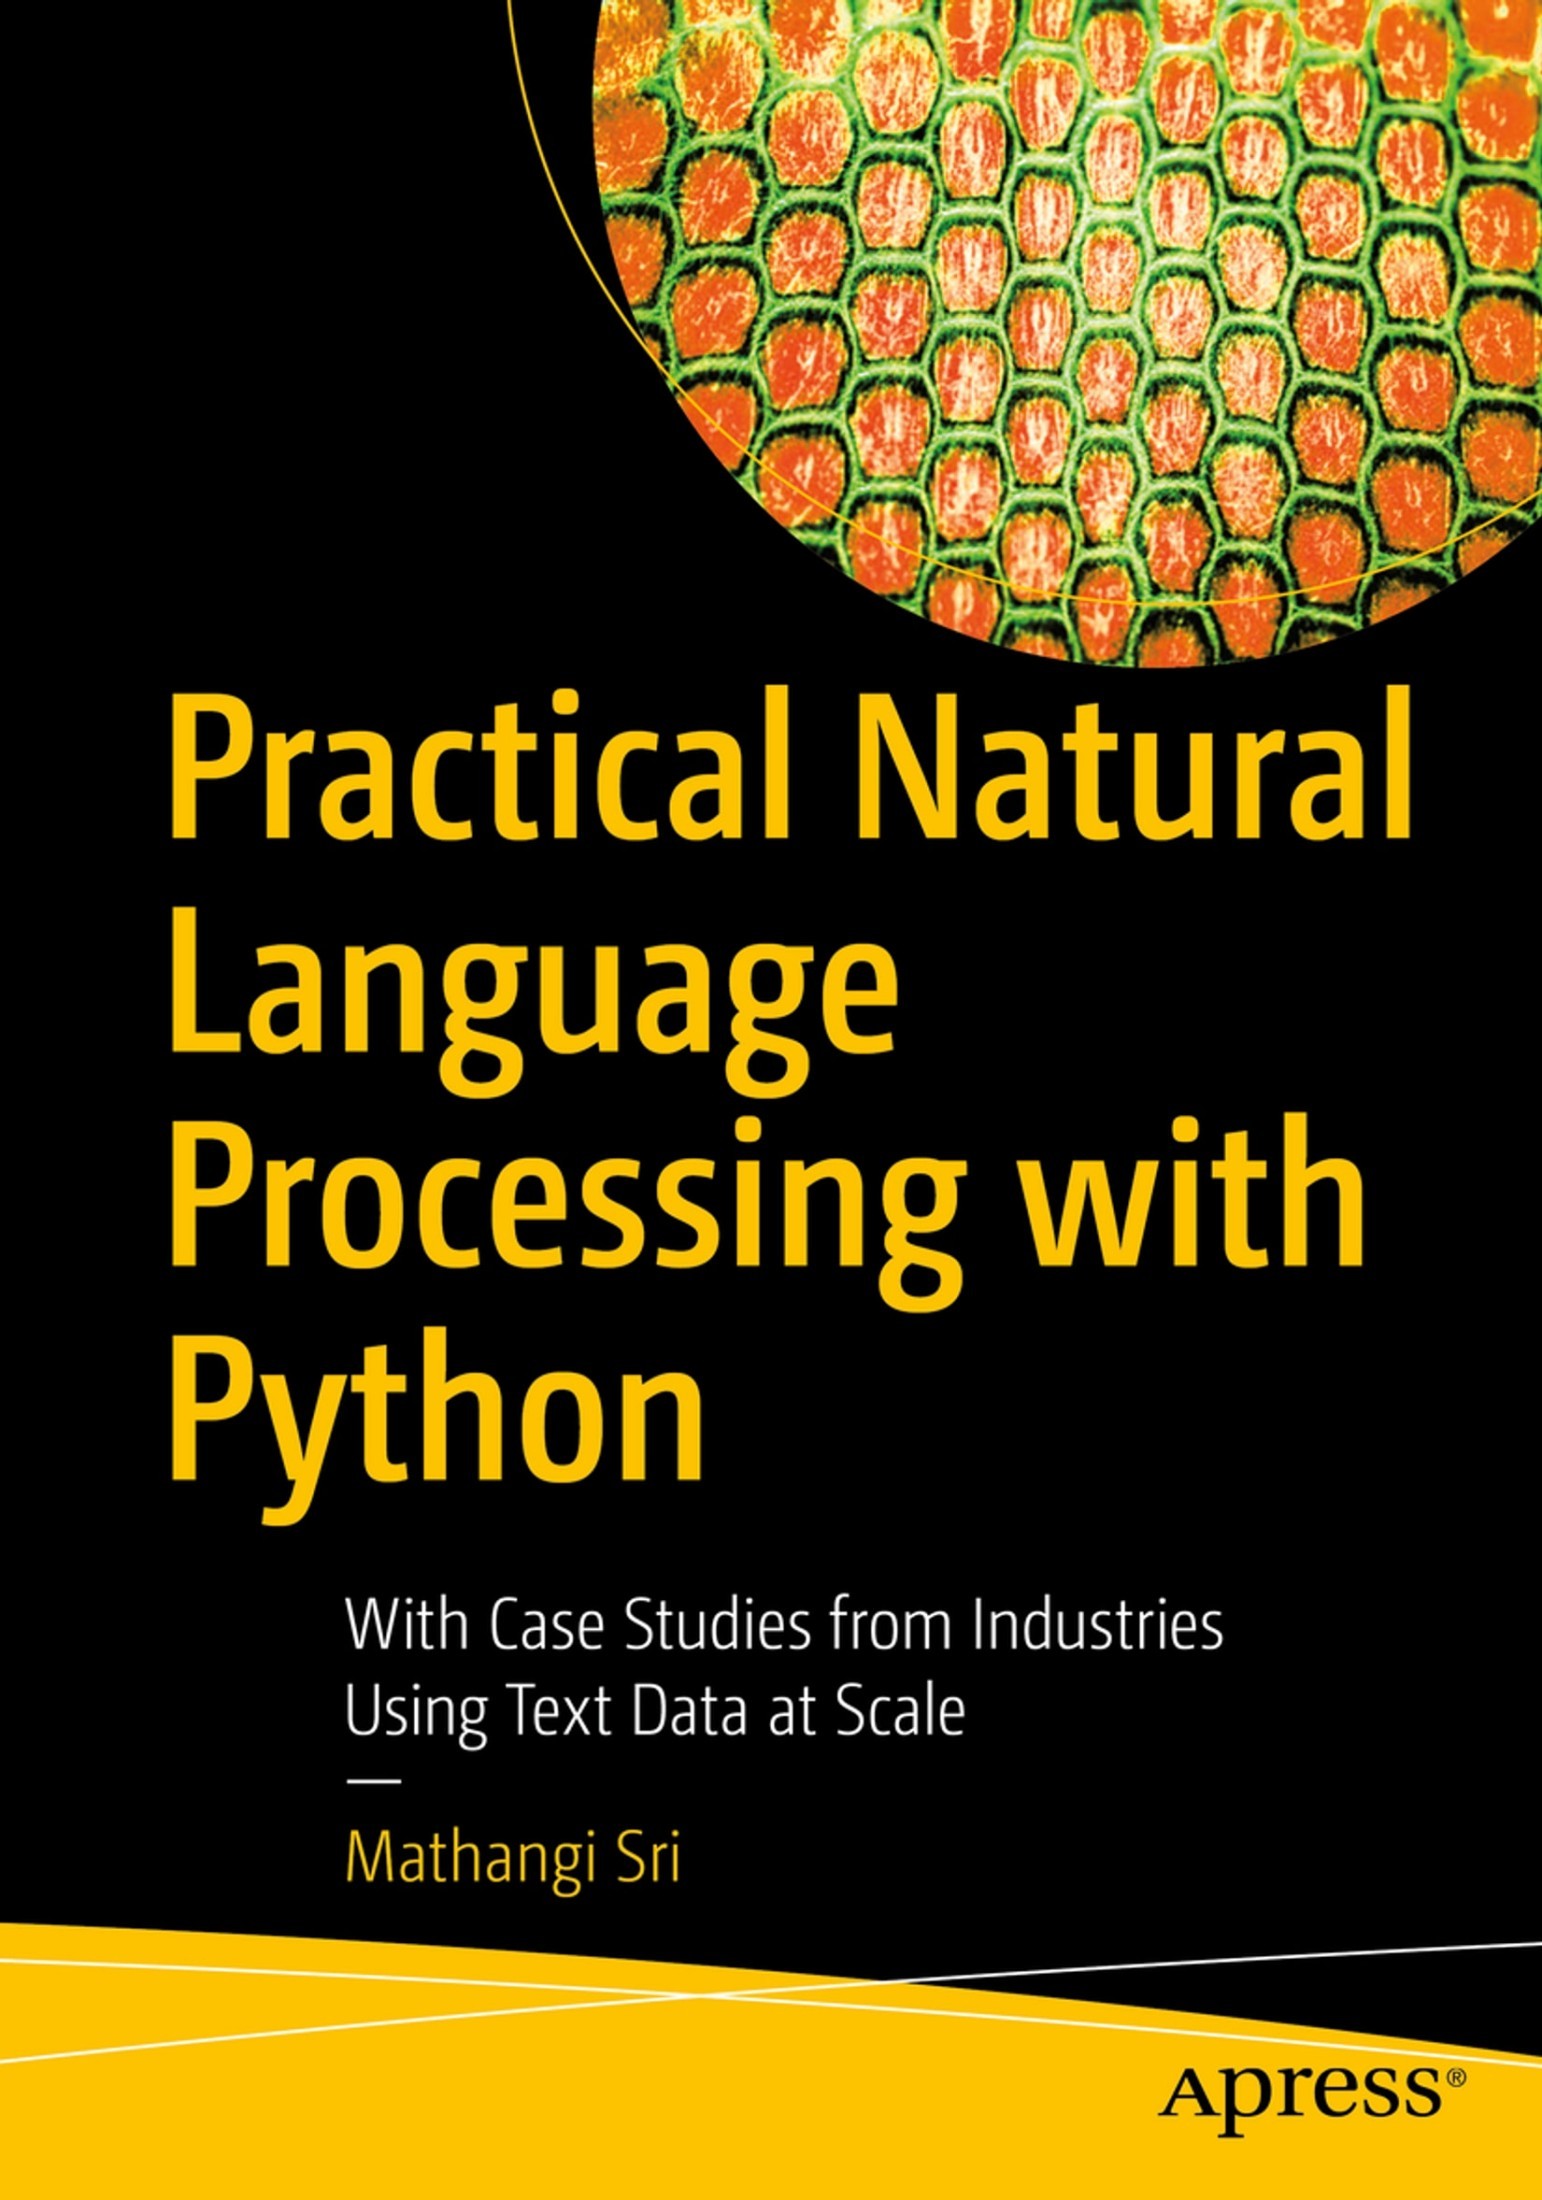 Practical Natural Language Processing with Python